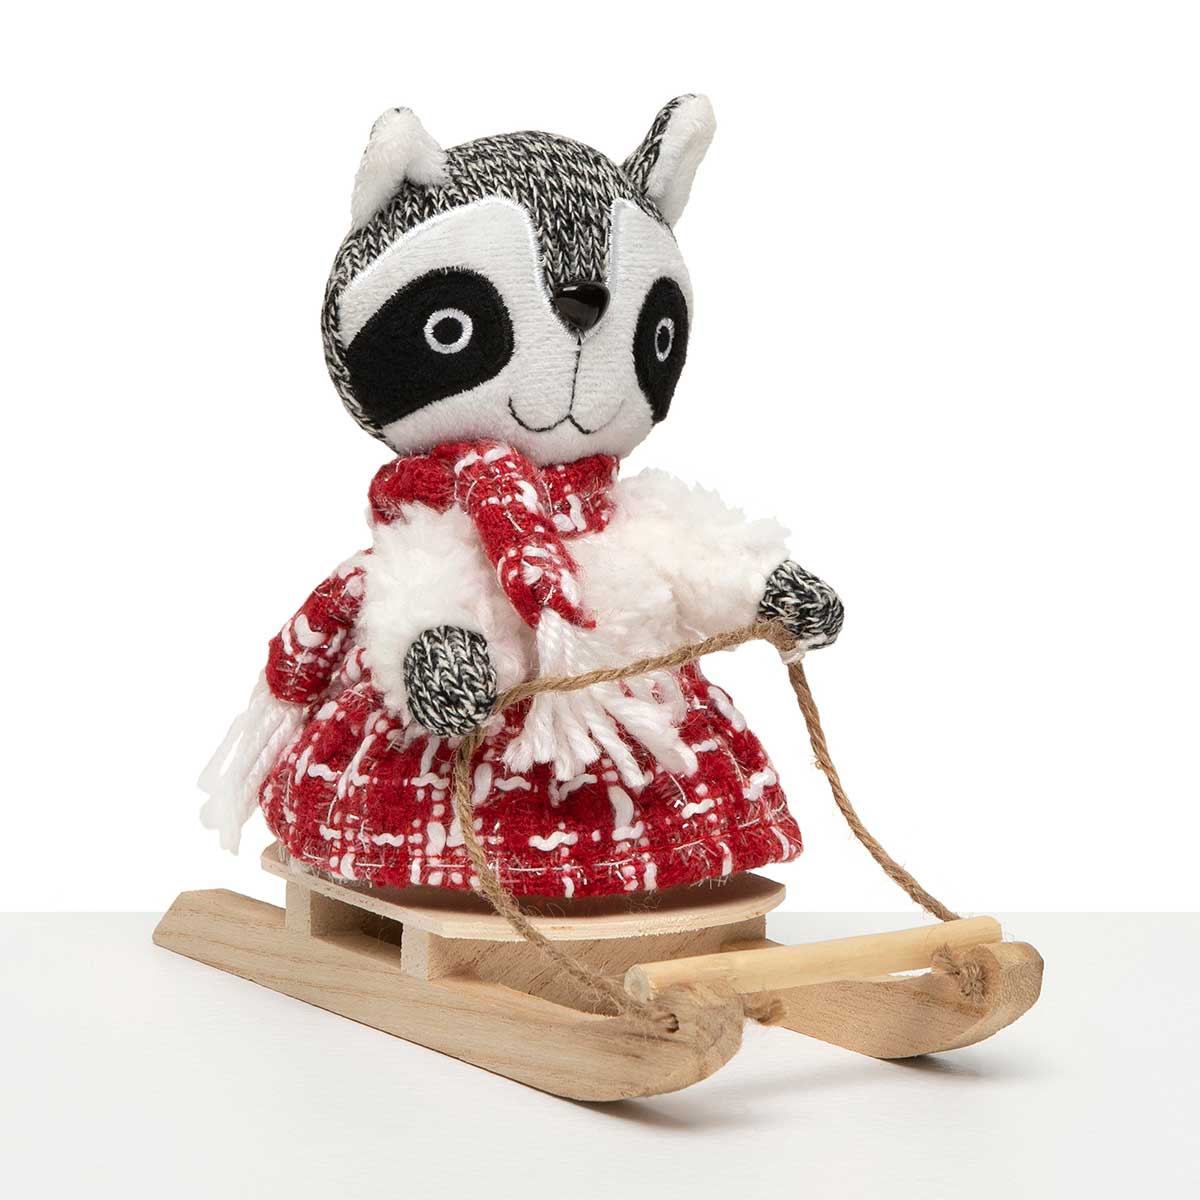 RACCOON WINTER ON SLED 3IN X 7IN X 6IN GY/RE/WH WITH SWEATER